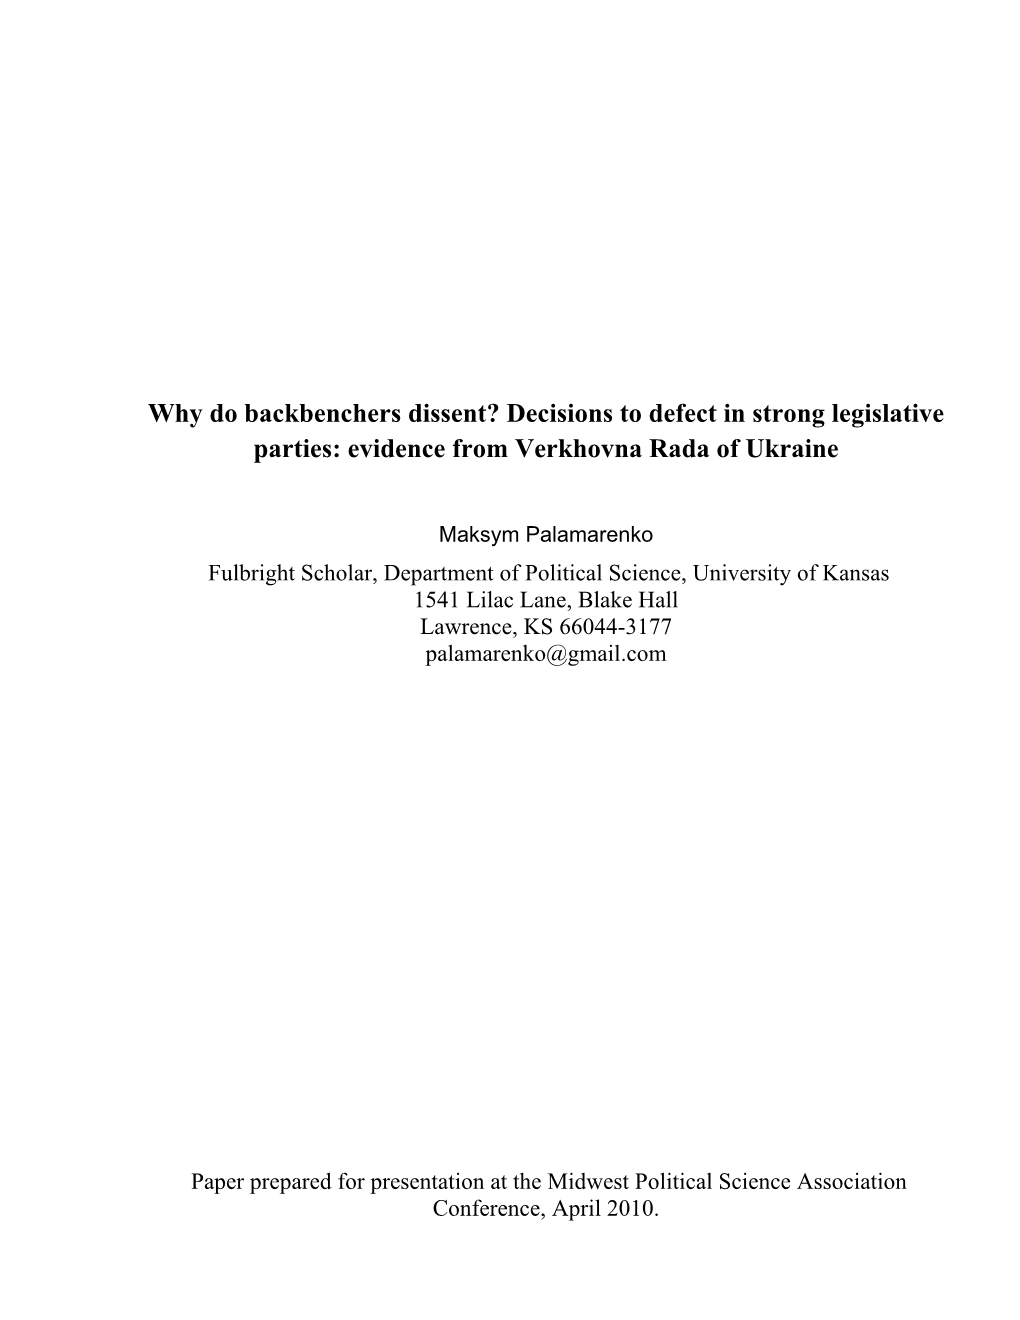 Why Do Backbenchers Dissent? Decisions to Defect in Strong Legislative Parties: Evidence from Verkhovna Rada of Ukraine